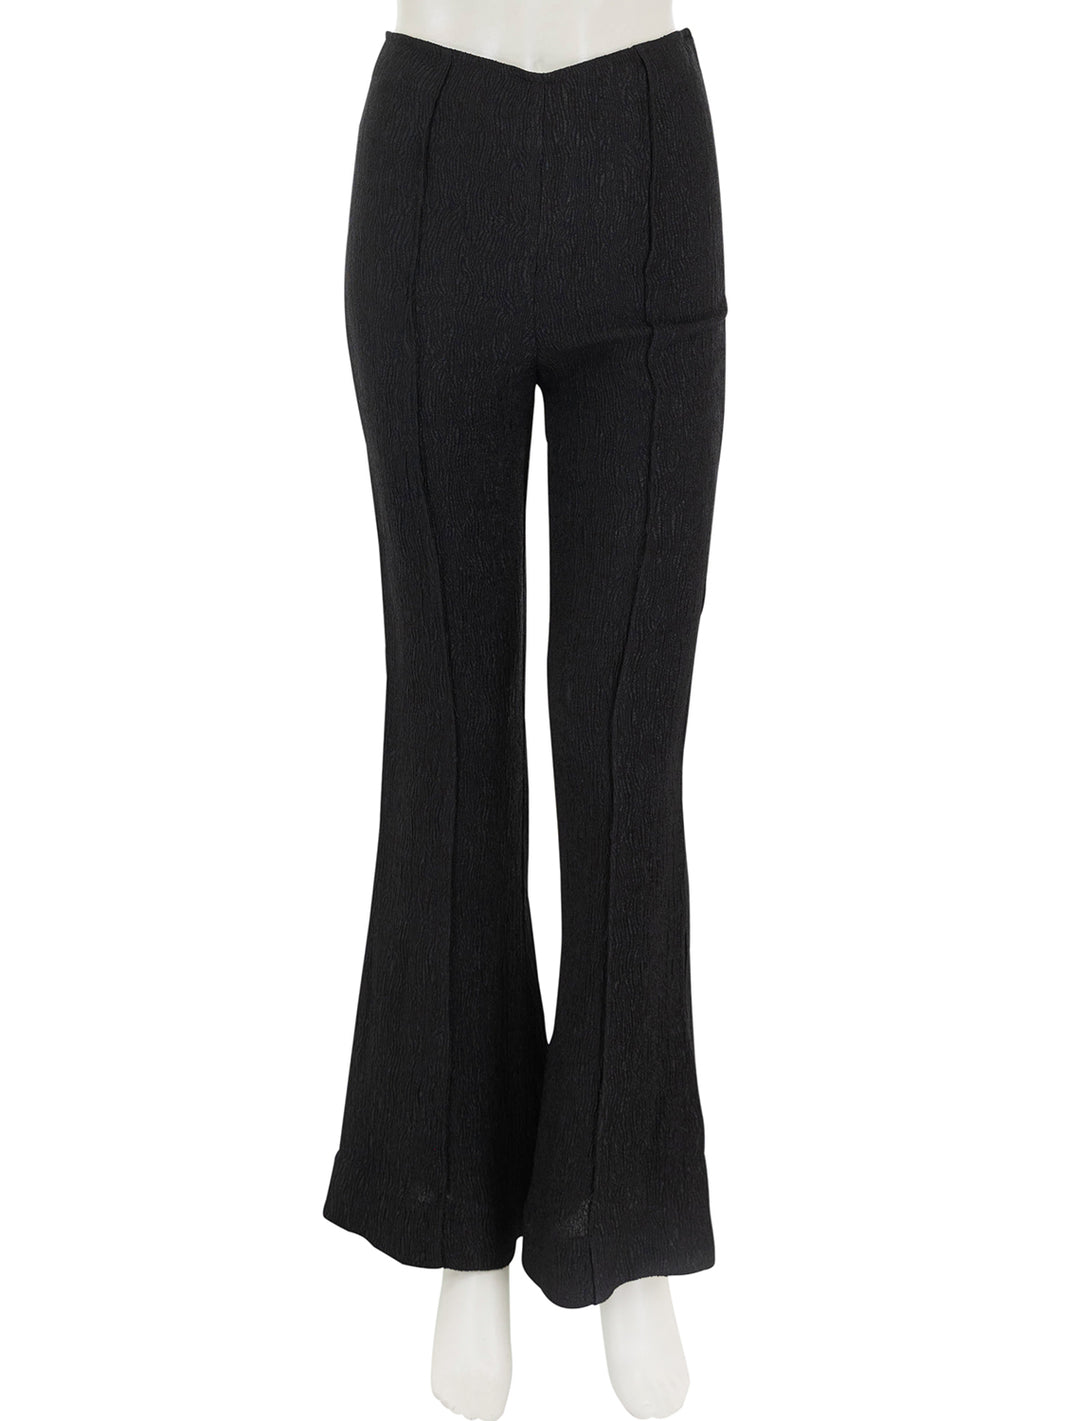 Front view of GANNI's stretch crepe viscose flare pants.